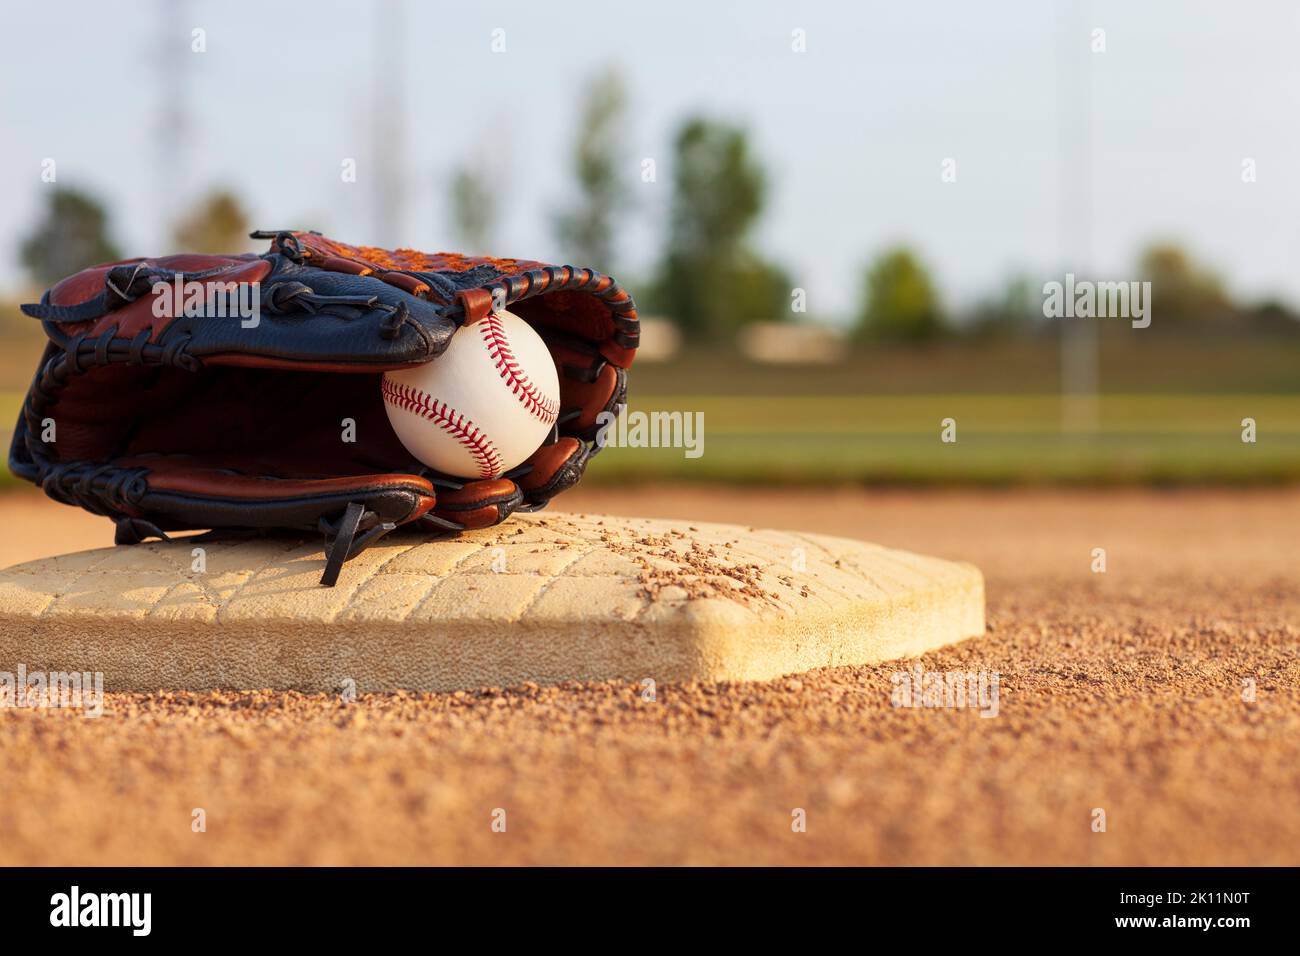 Selective focus of a baseball in a leather mitt on a base of a baseball park infield on a sunny day Stock Photo